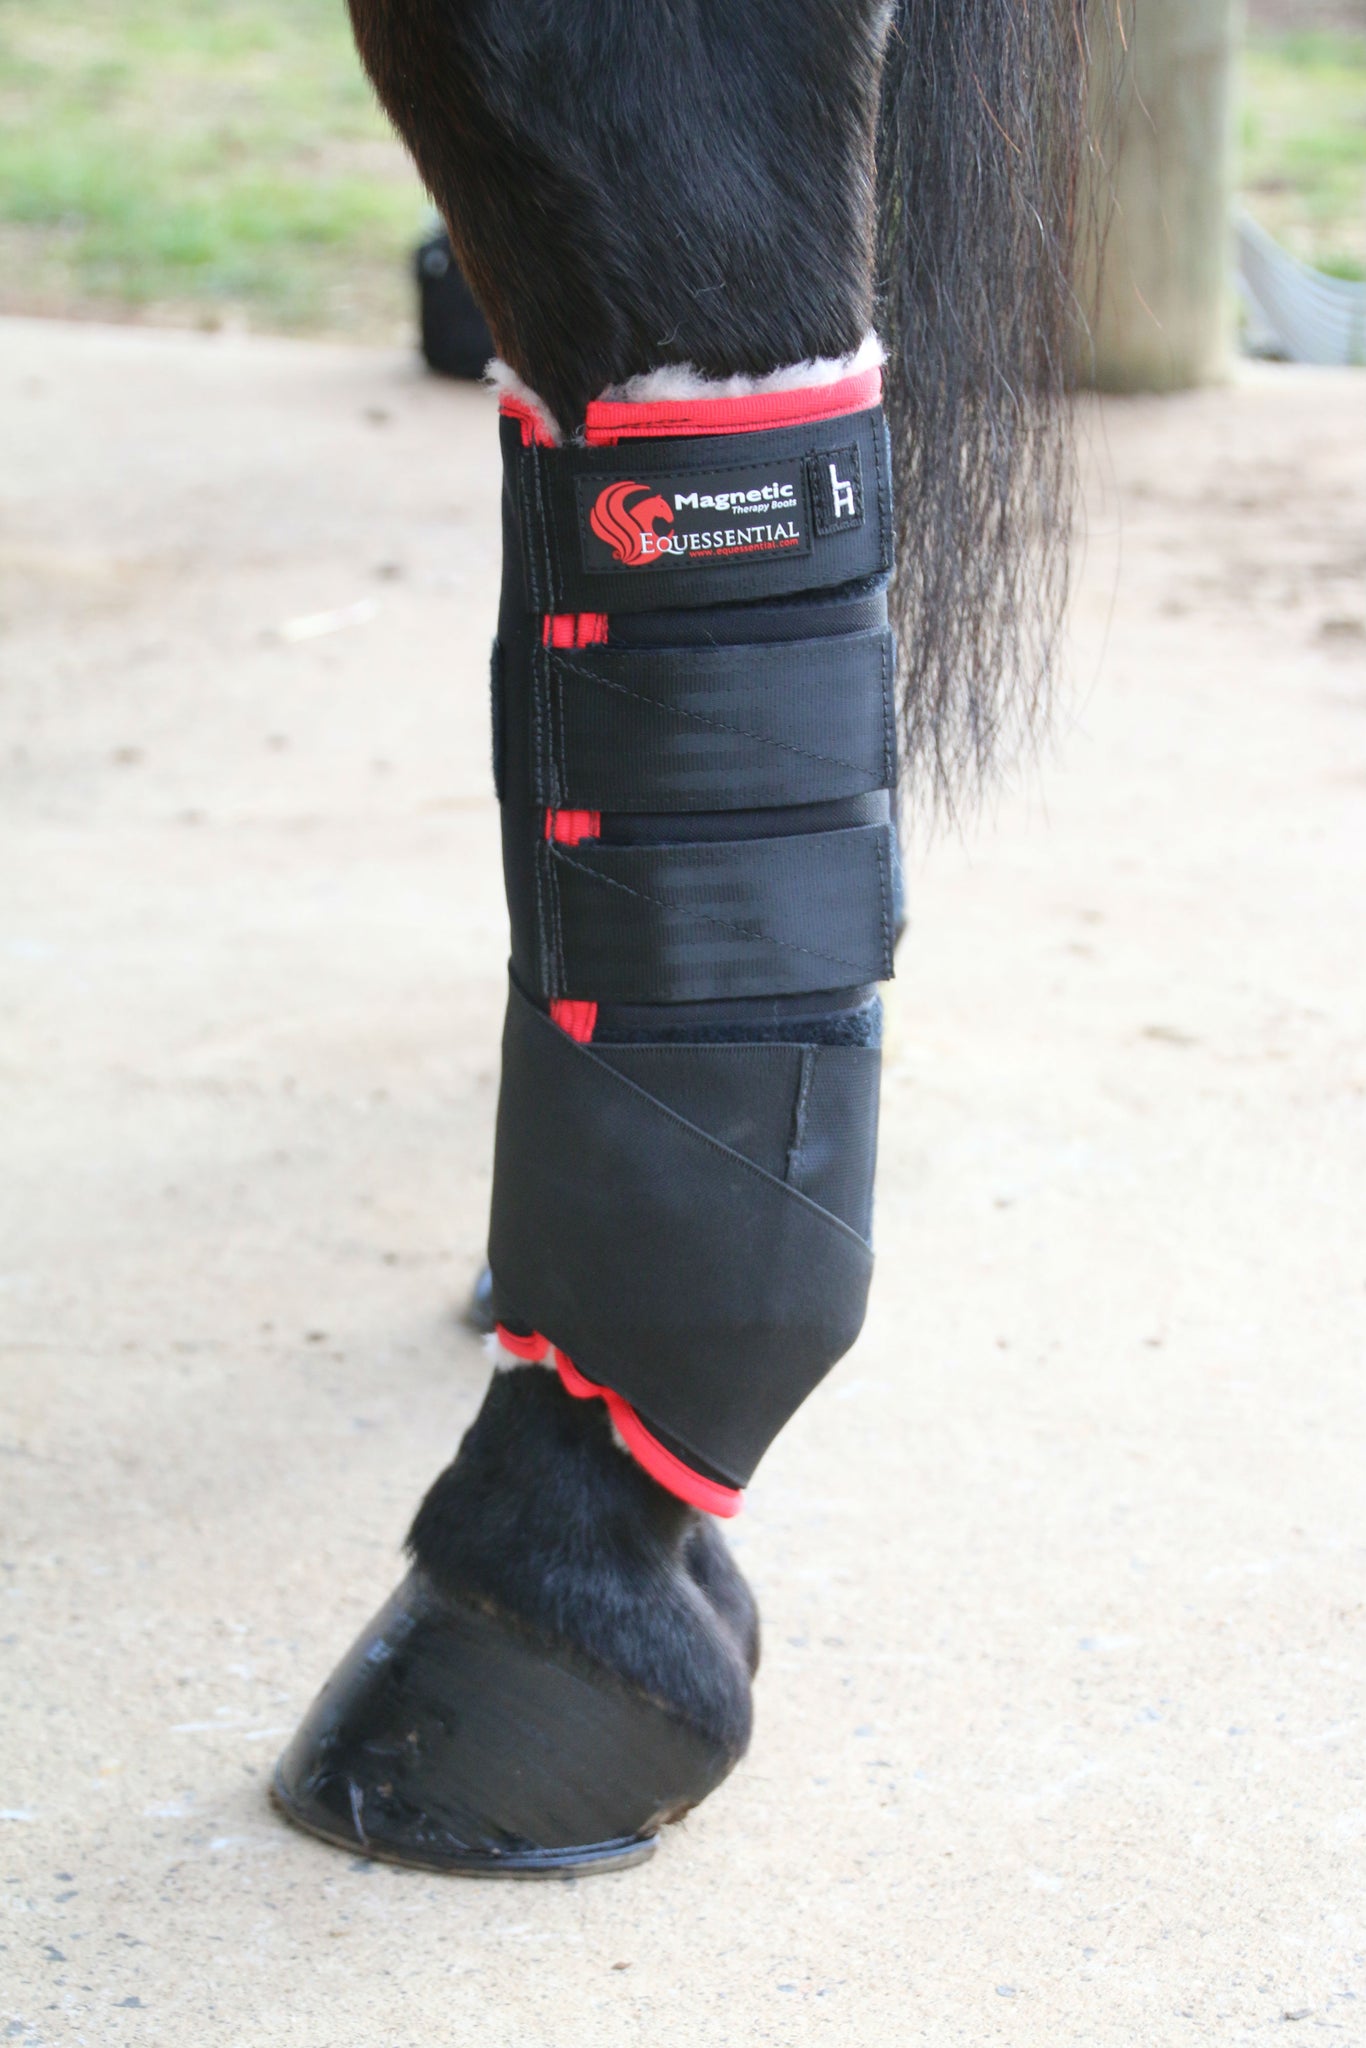 equine magnetic therapy boots